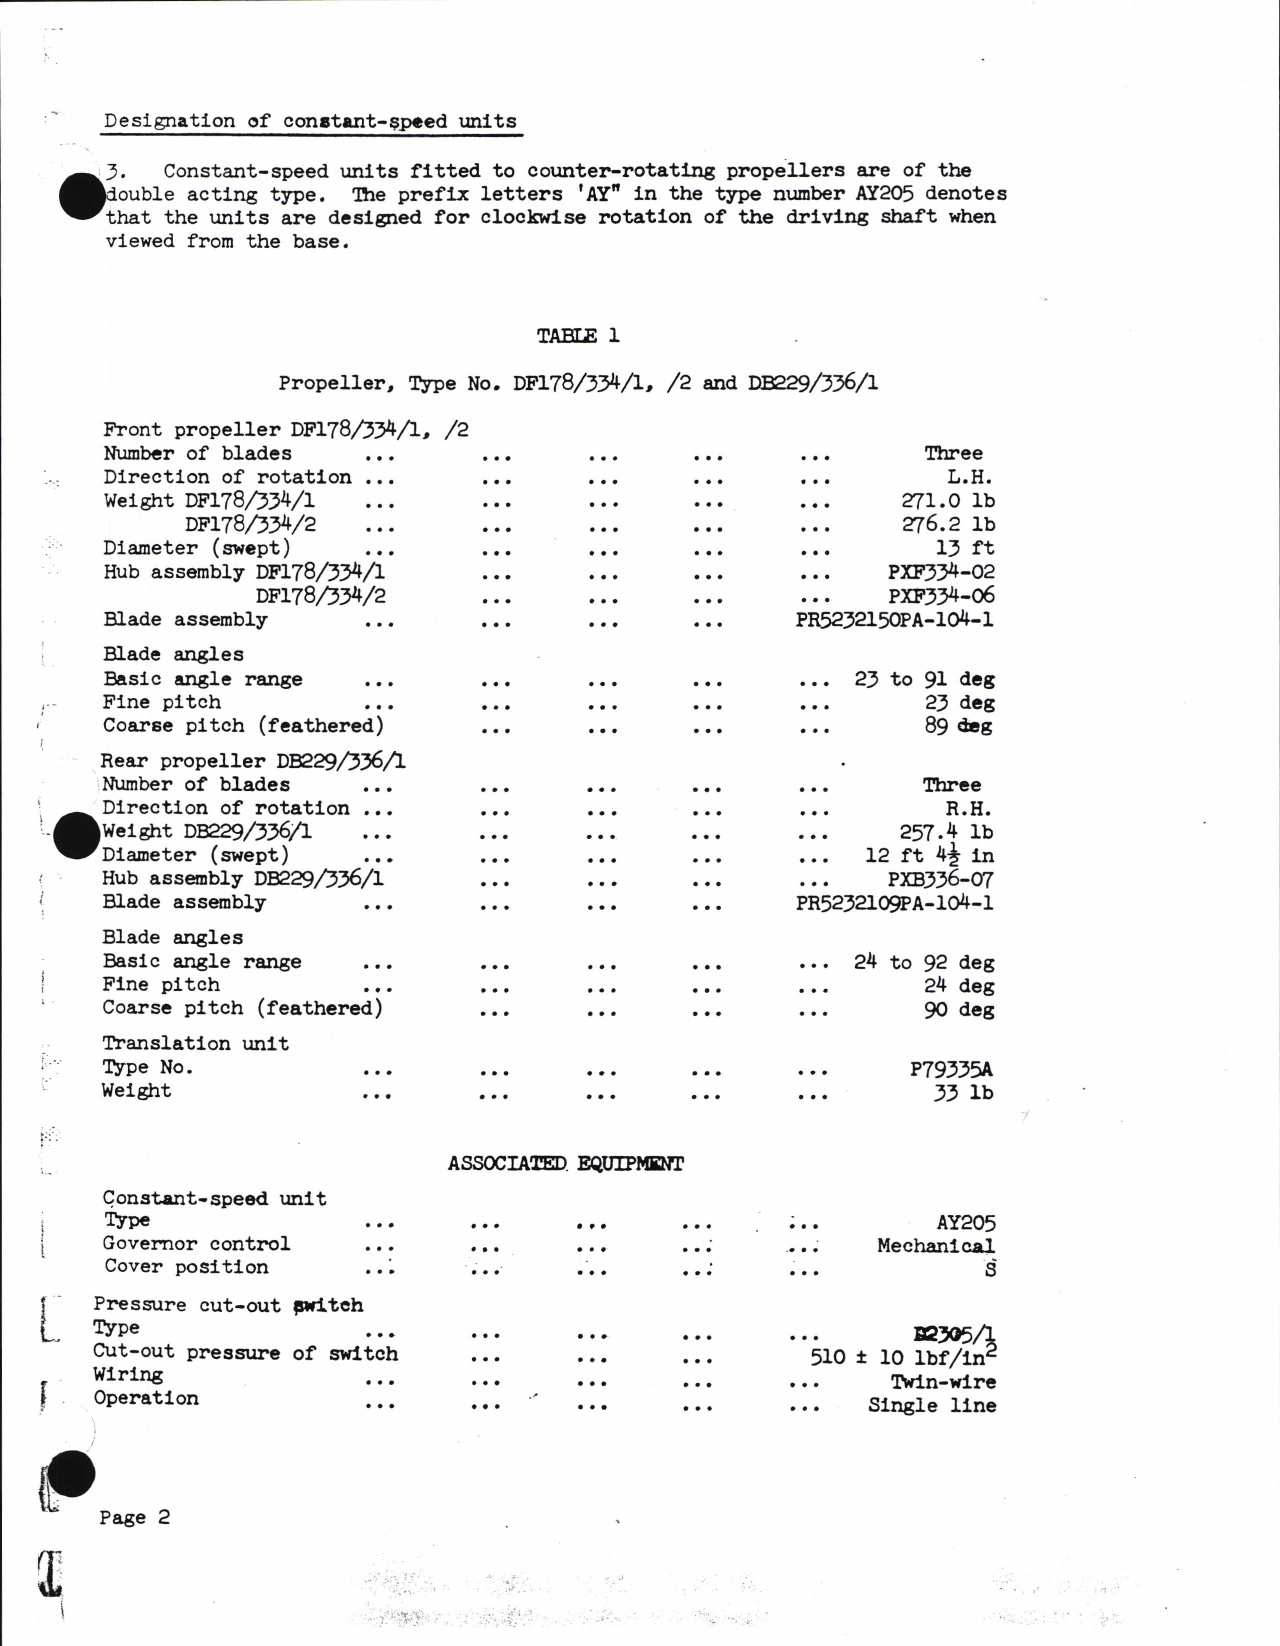 Sample page 7 from AirCorps Library document: Propeller Types DF 178/334/1,/2 and DB299/336/1 For Shackleton Aircraft